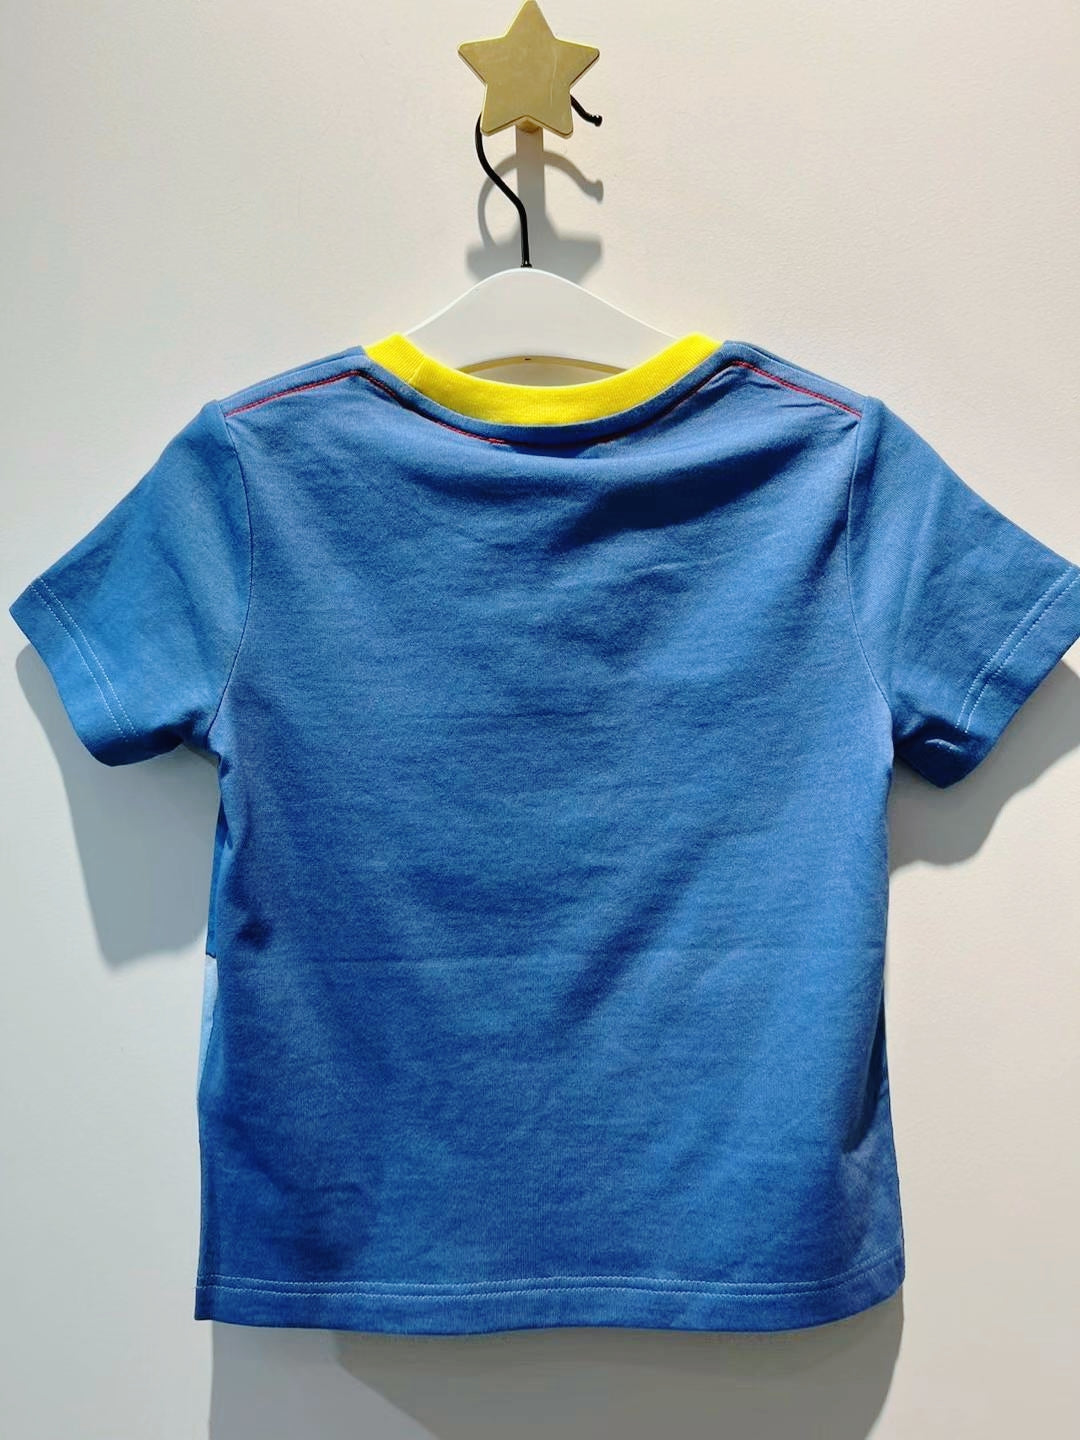 The Marc Jacobs Boy Pale Blue Short Sleeves Tee Shirt